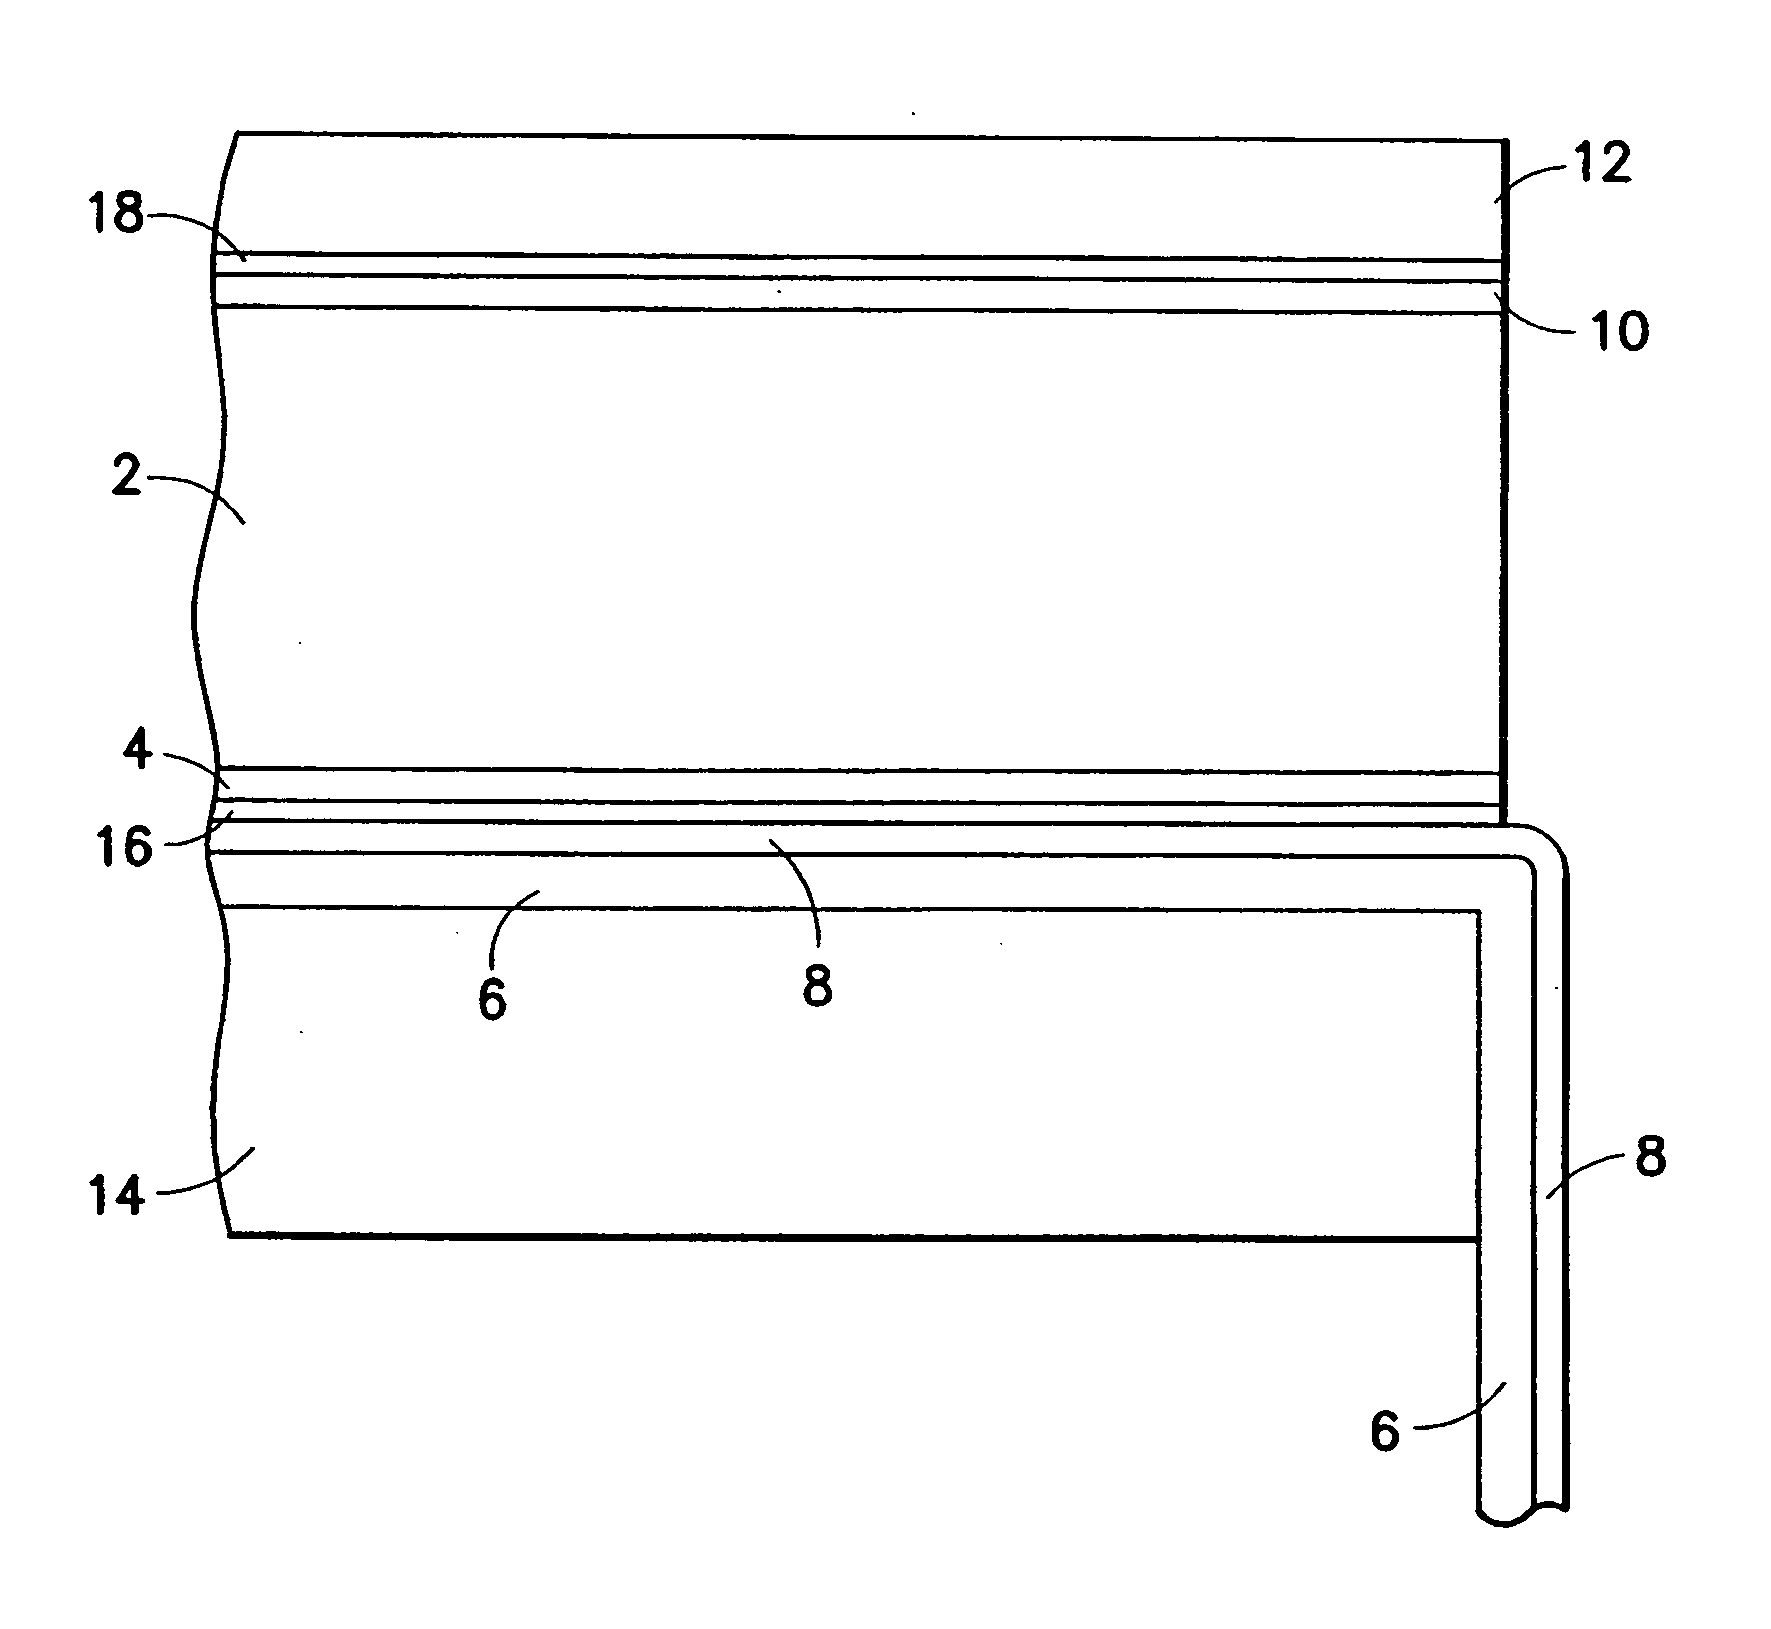 Method for enhancing epoxy adhesion to gold surfaces